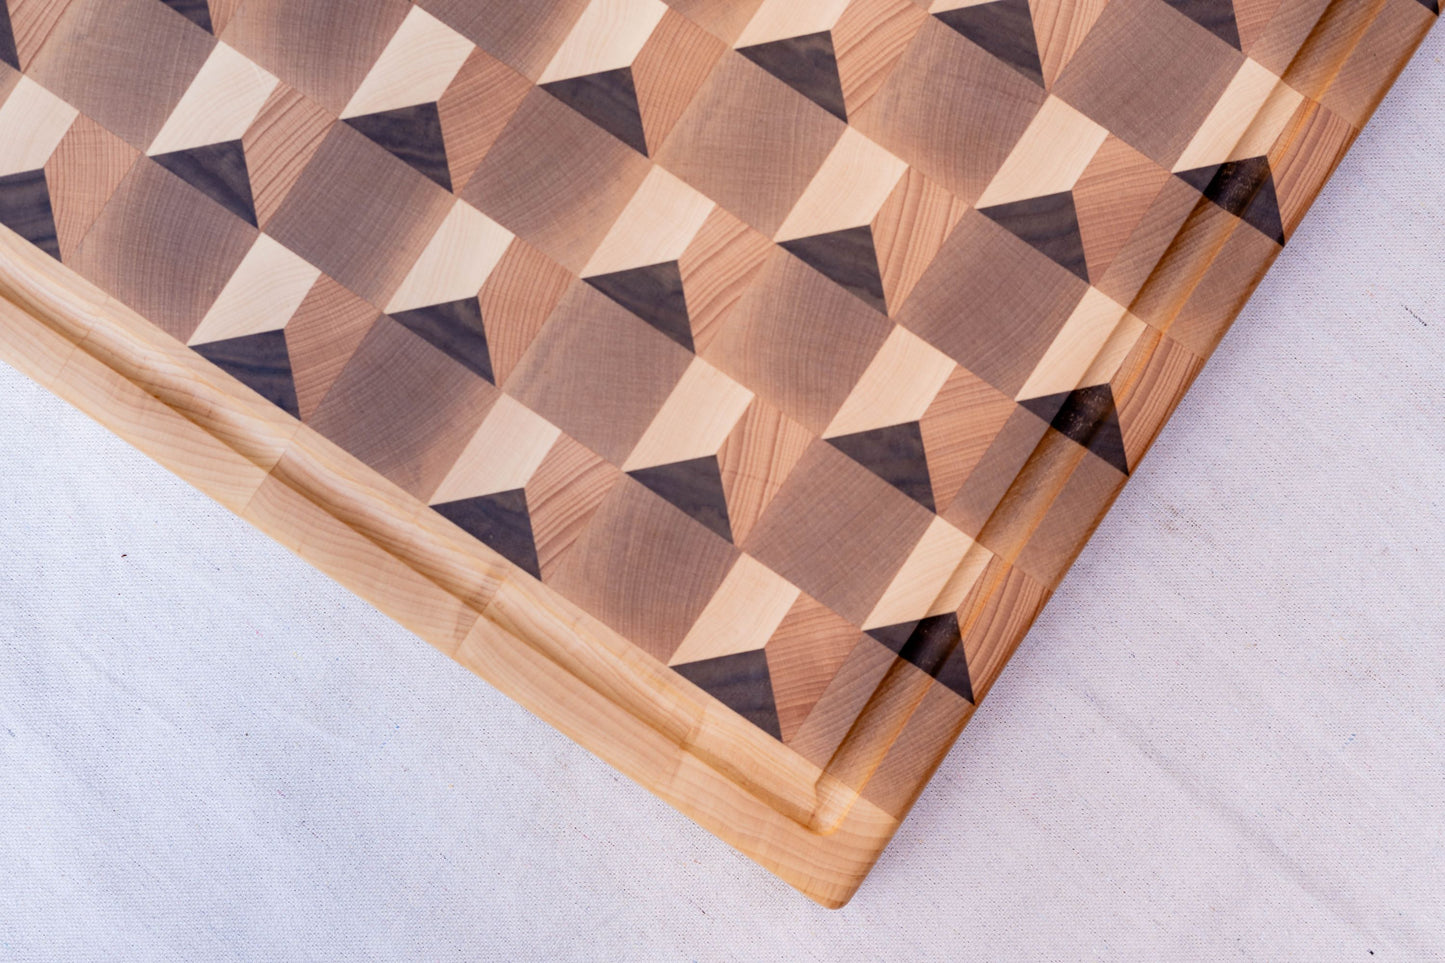 3D Design Cutting Board with Maple Wood Frame